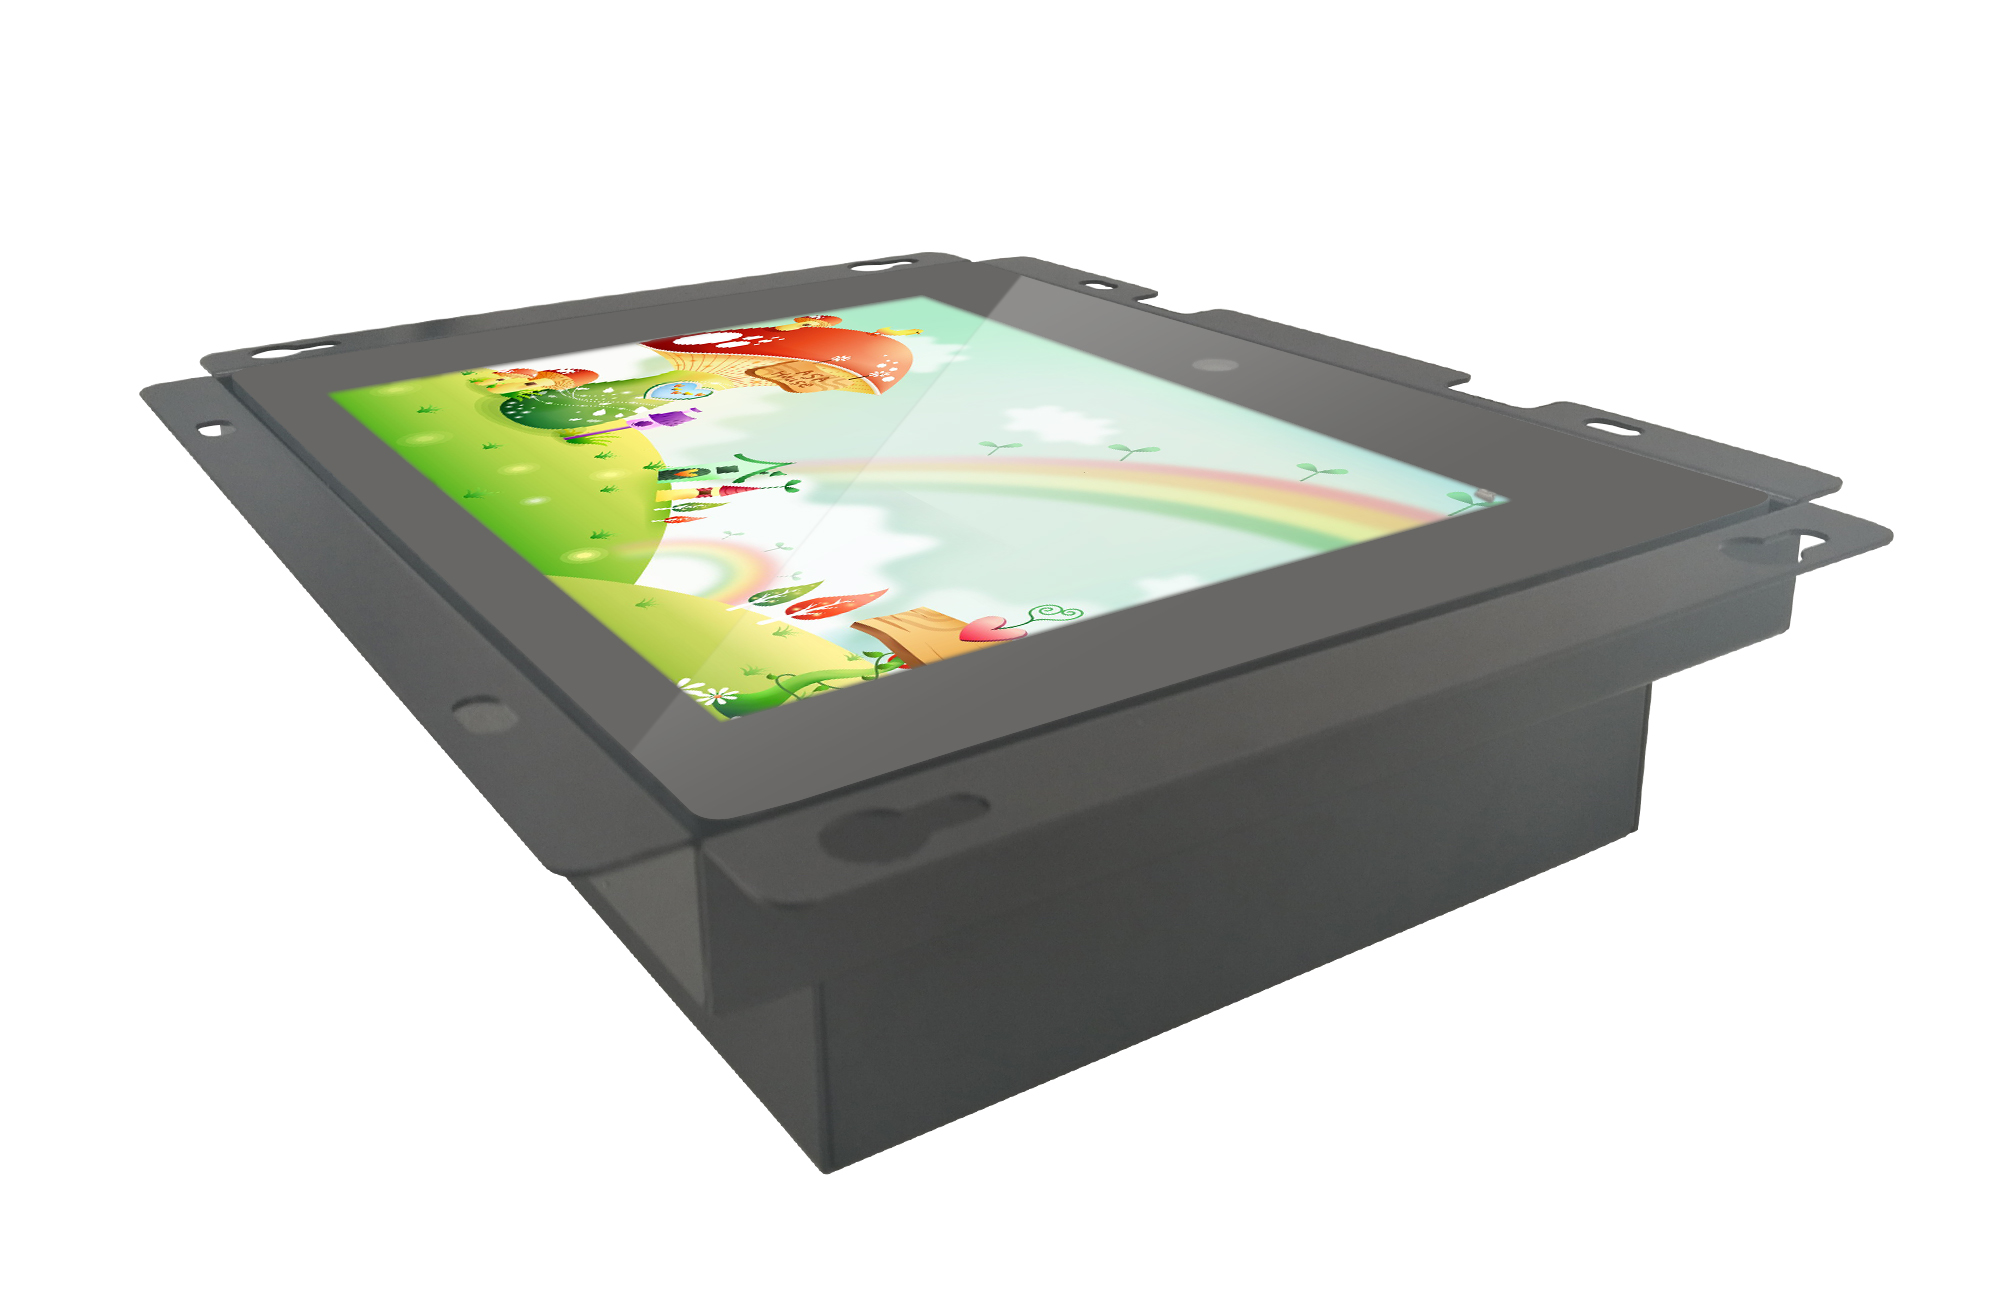 8.4 Inch Android Based All -In -One Panel PC